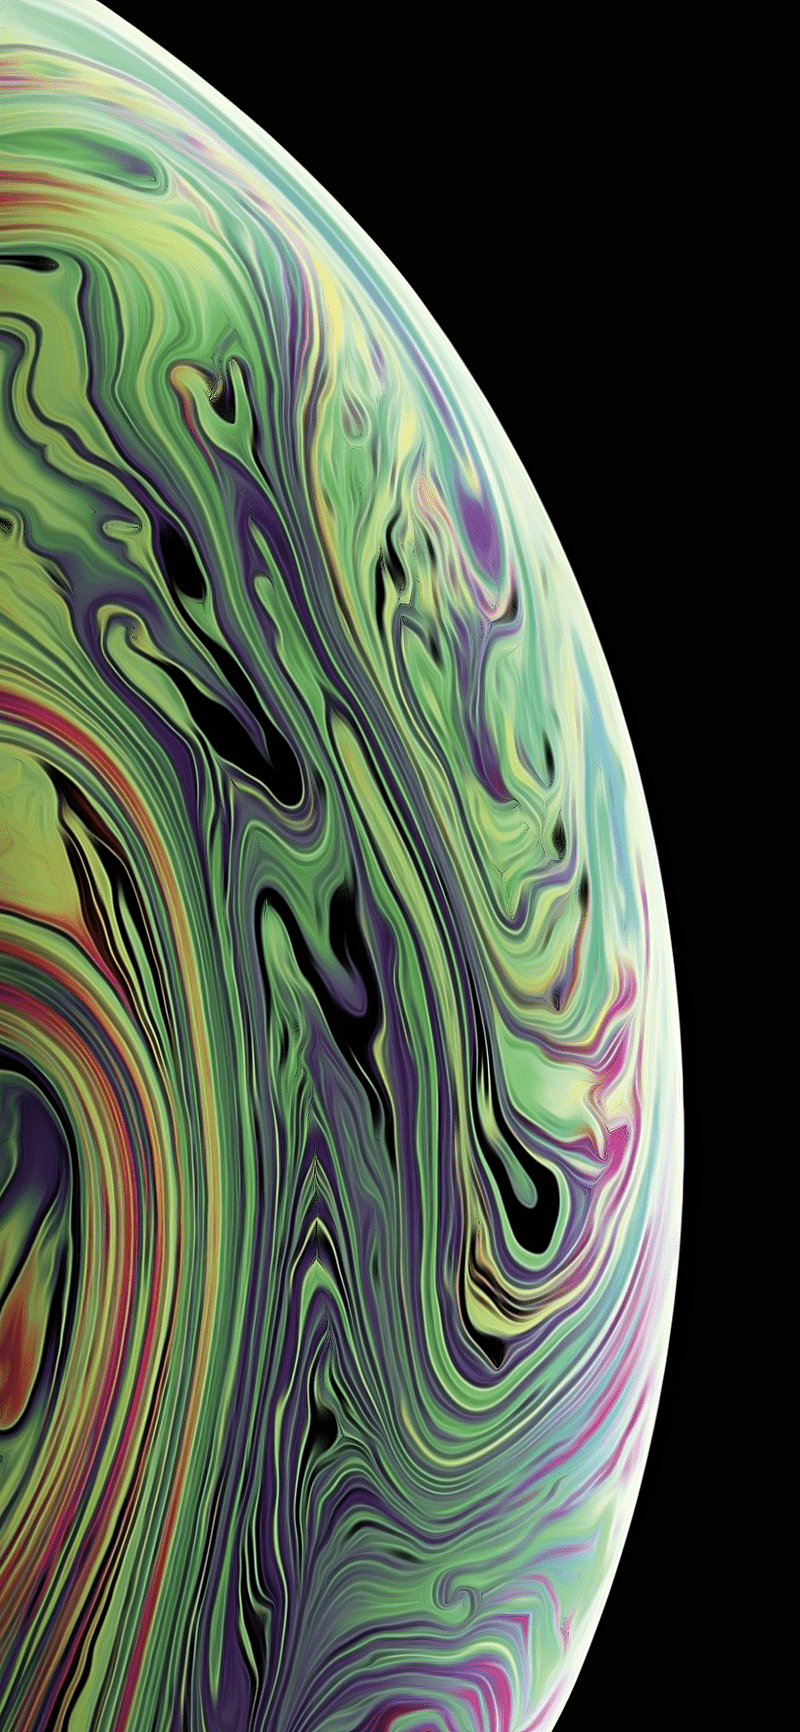 Download Original iPhone XS Max XS and XR Wallpapers 800x1732